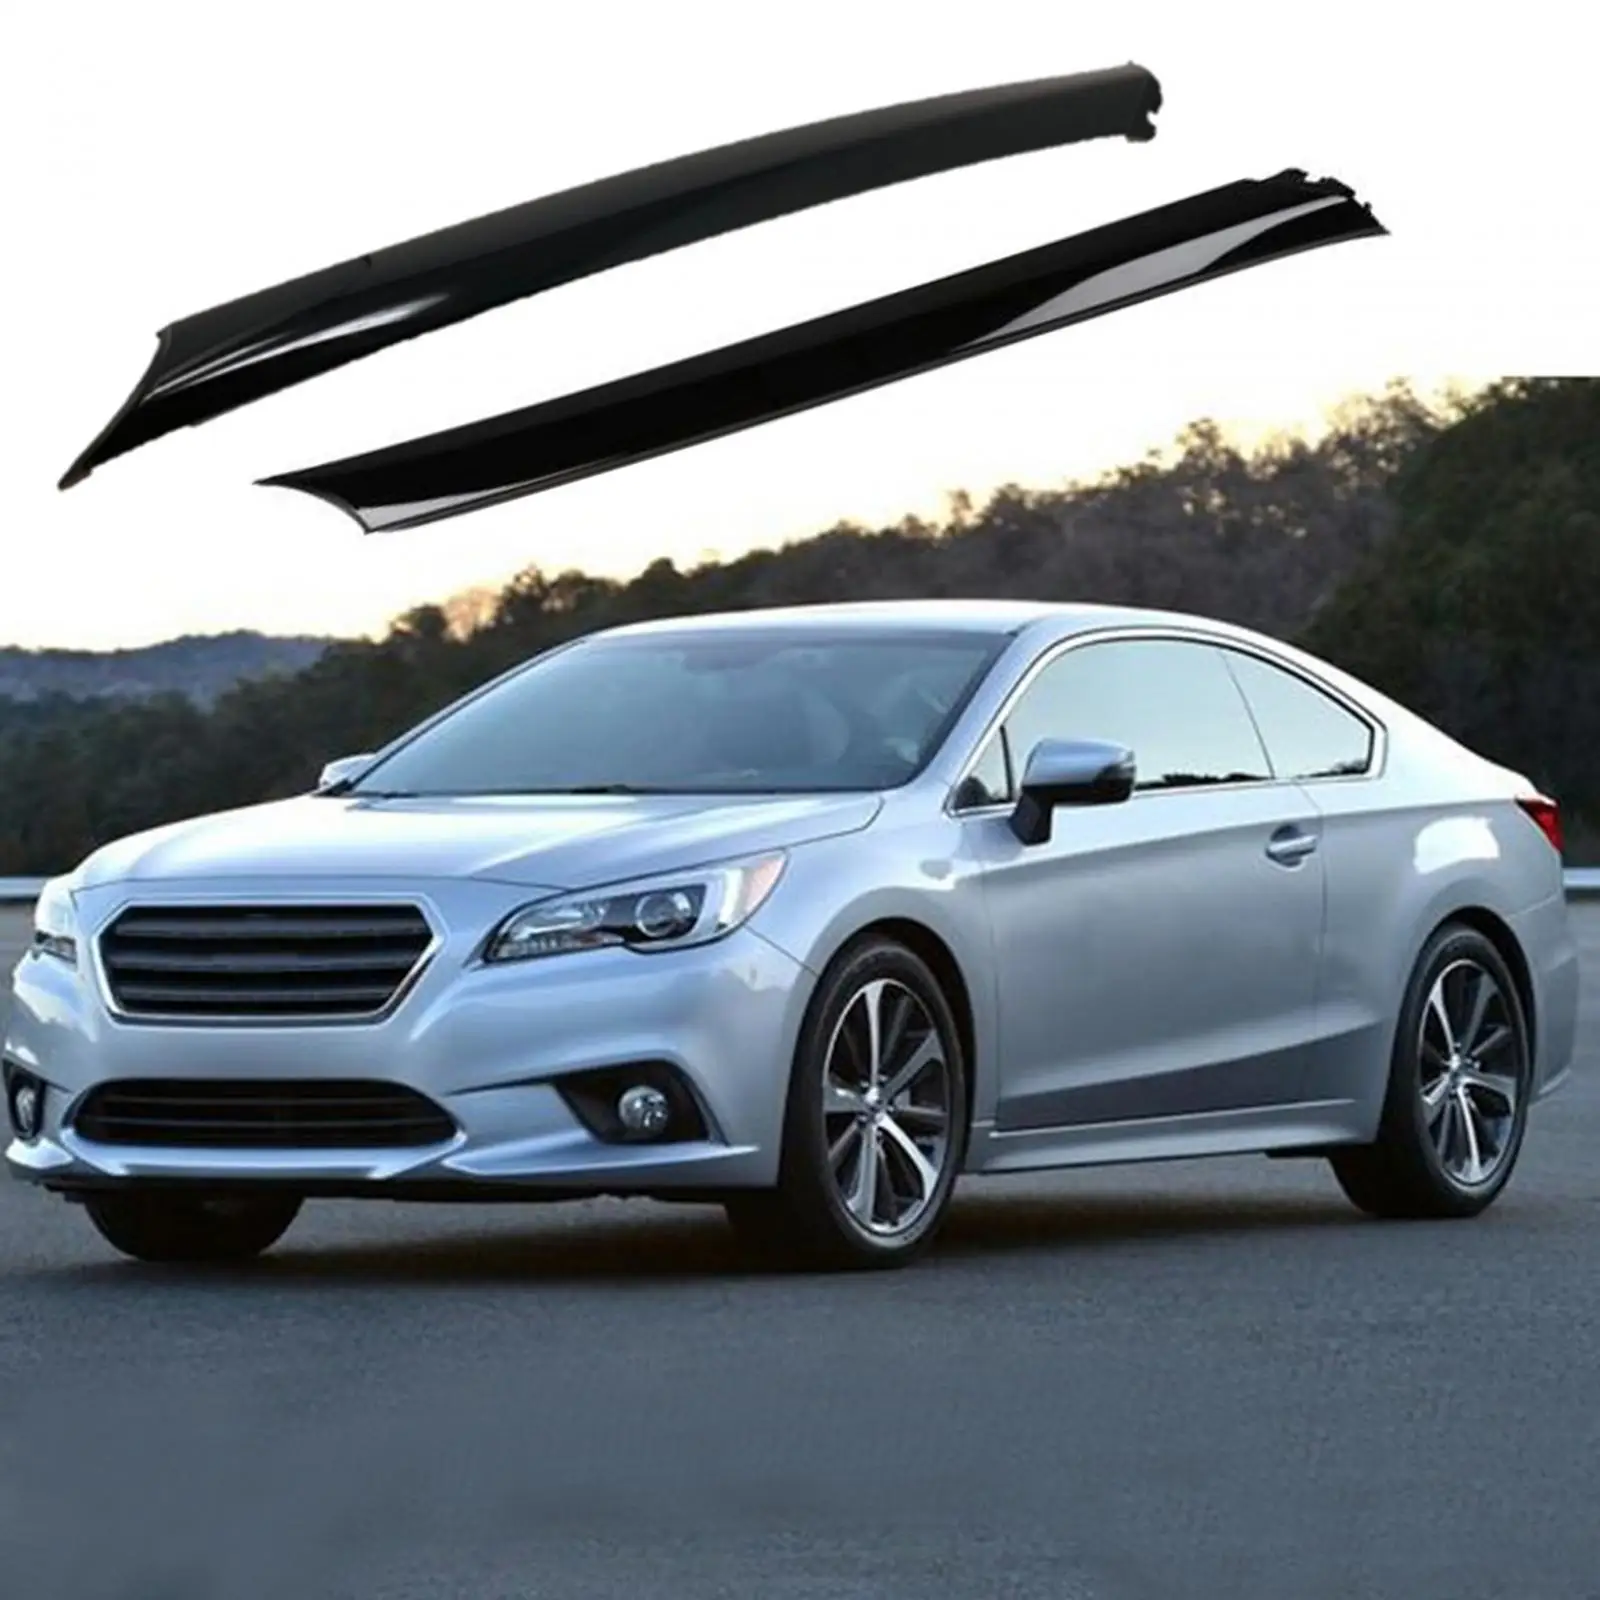 Windshield Pillar Trim Panel Molding Window Outside Accessories for Nissan Maxima 2016 2017 2018 2019 2020 Easy to Install